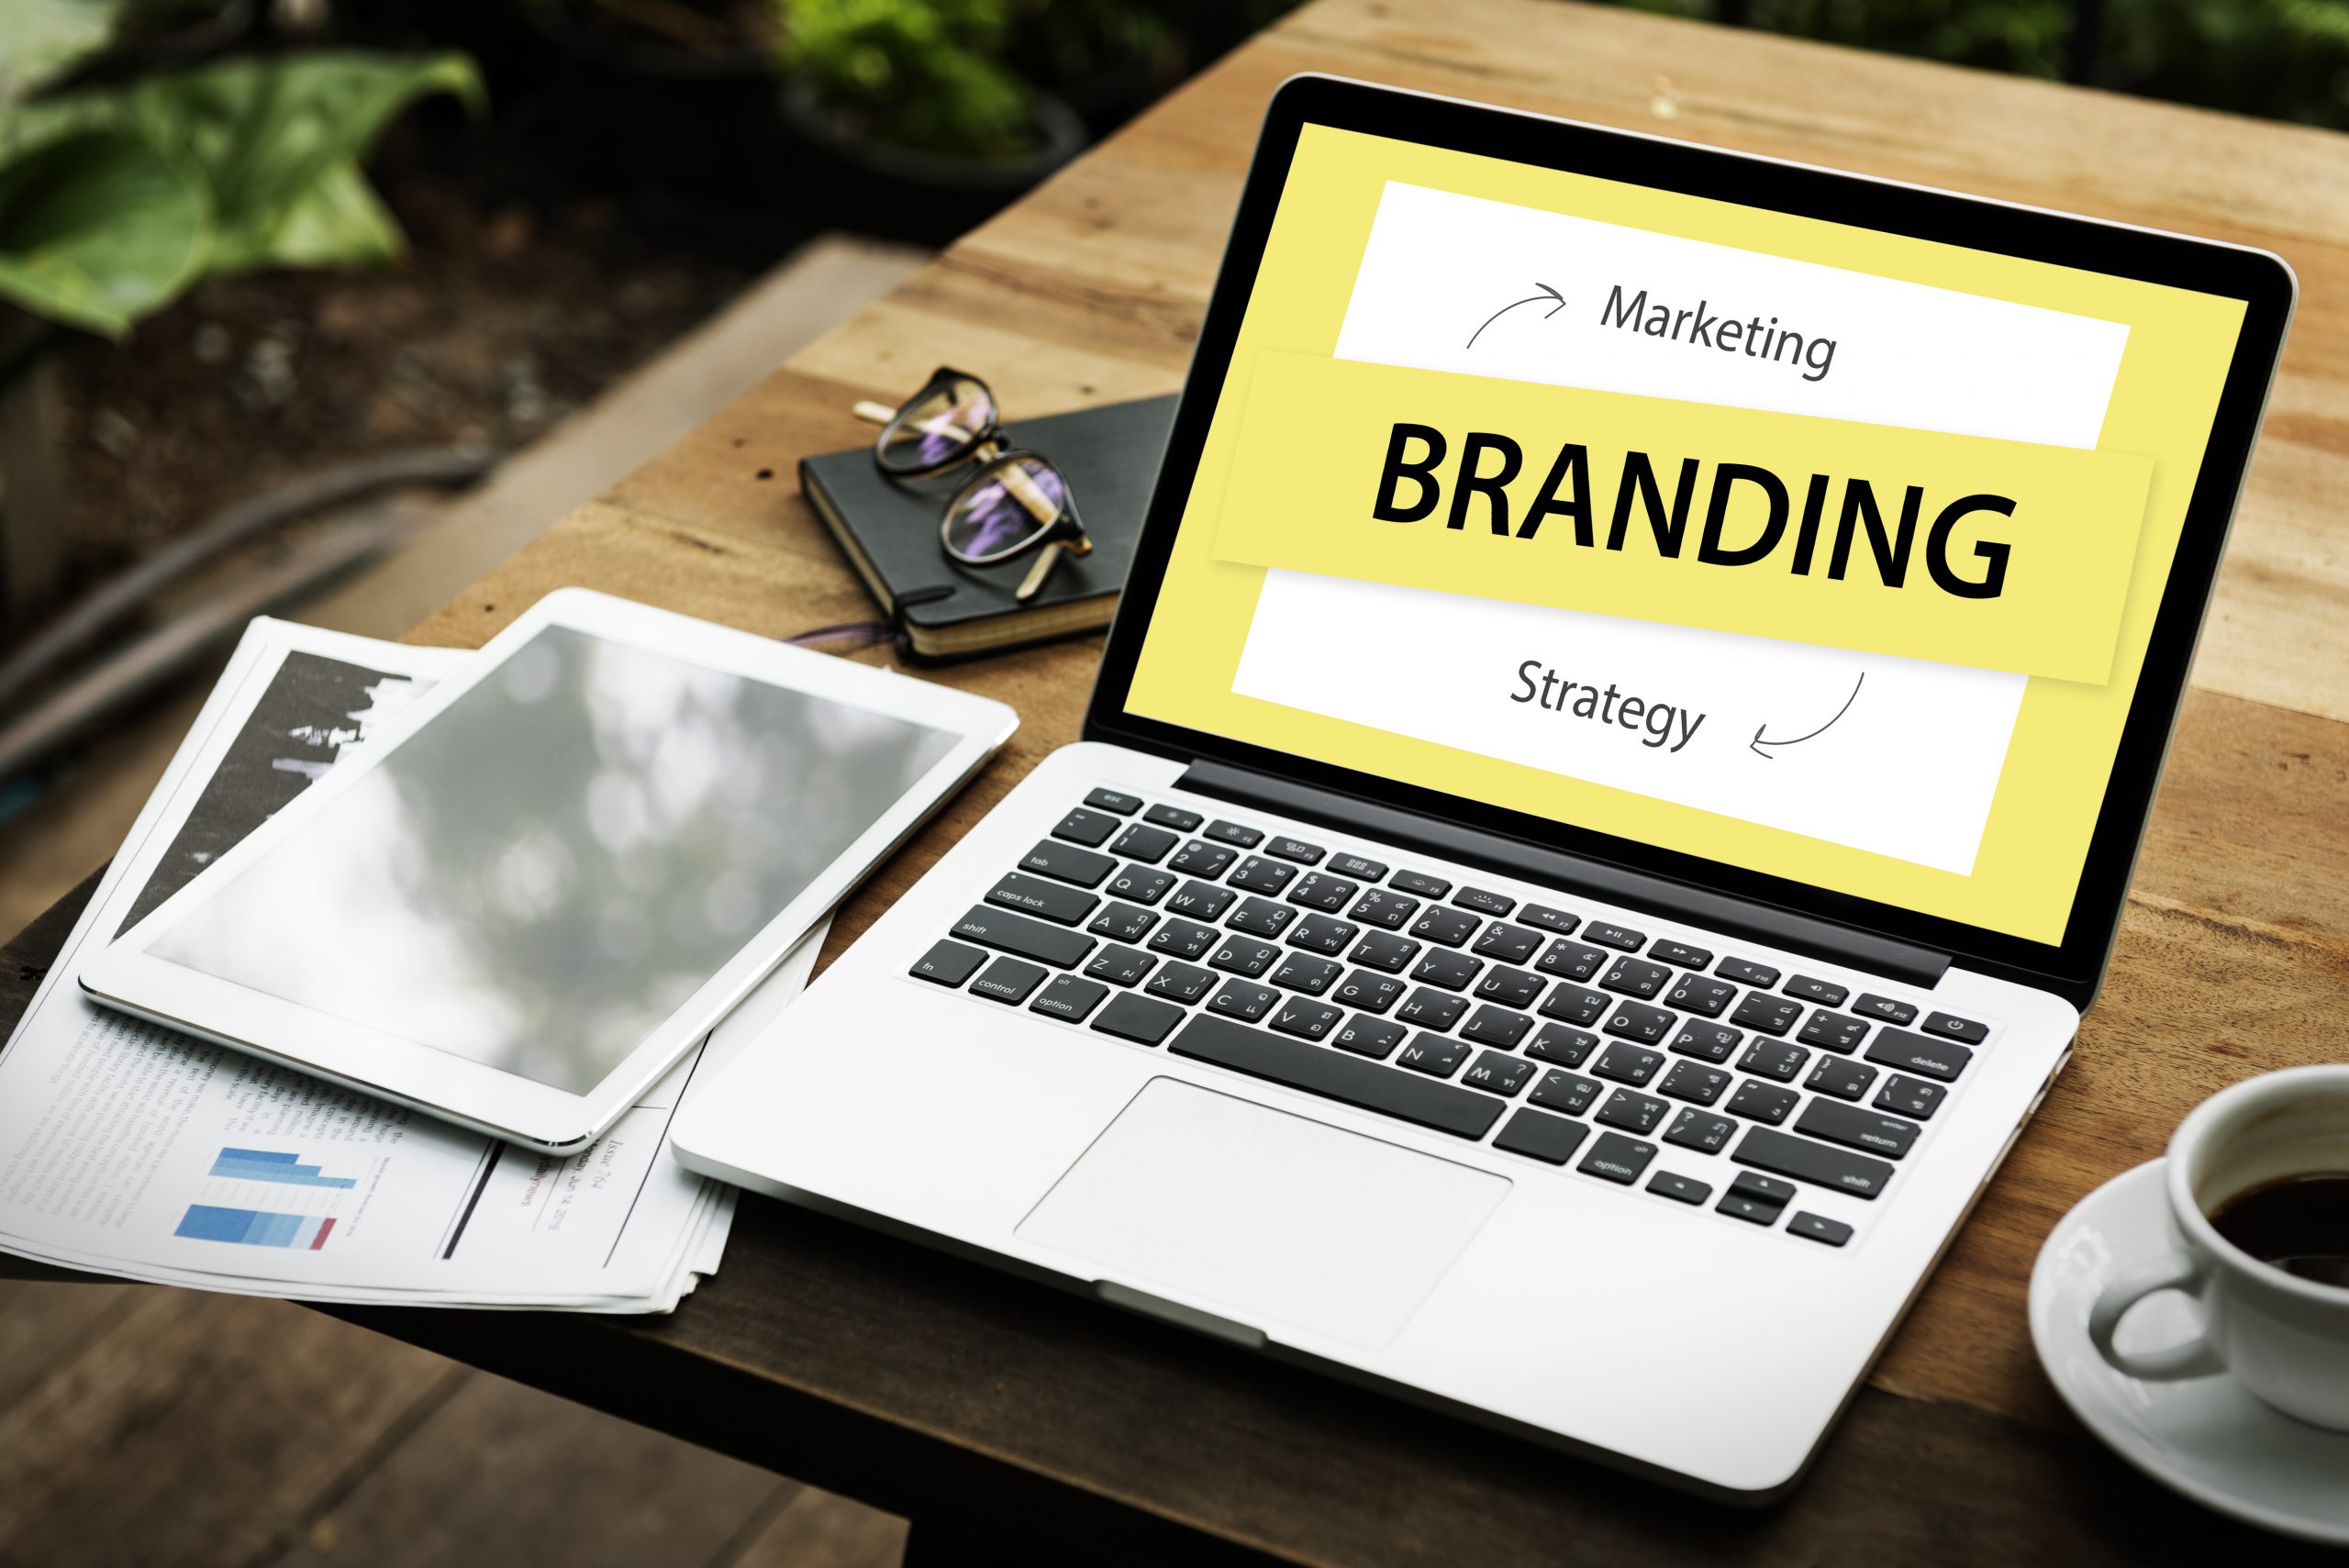 Digital branding and strategies for businesses in 2022